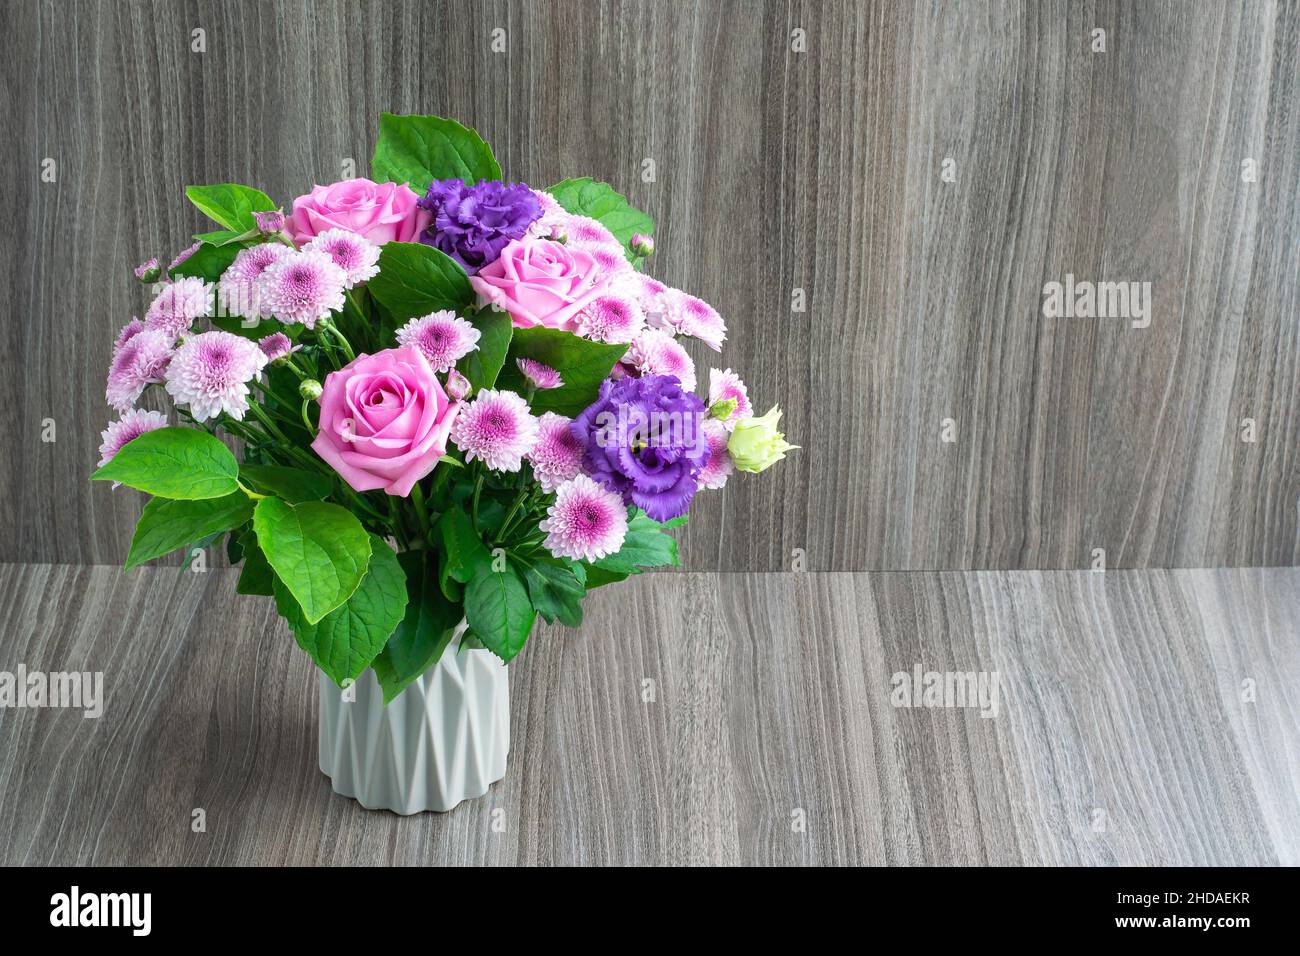 Flower arrangement in a small vase on a wooden background, copy space for text Stock Photo